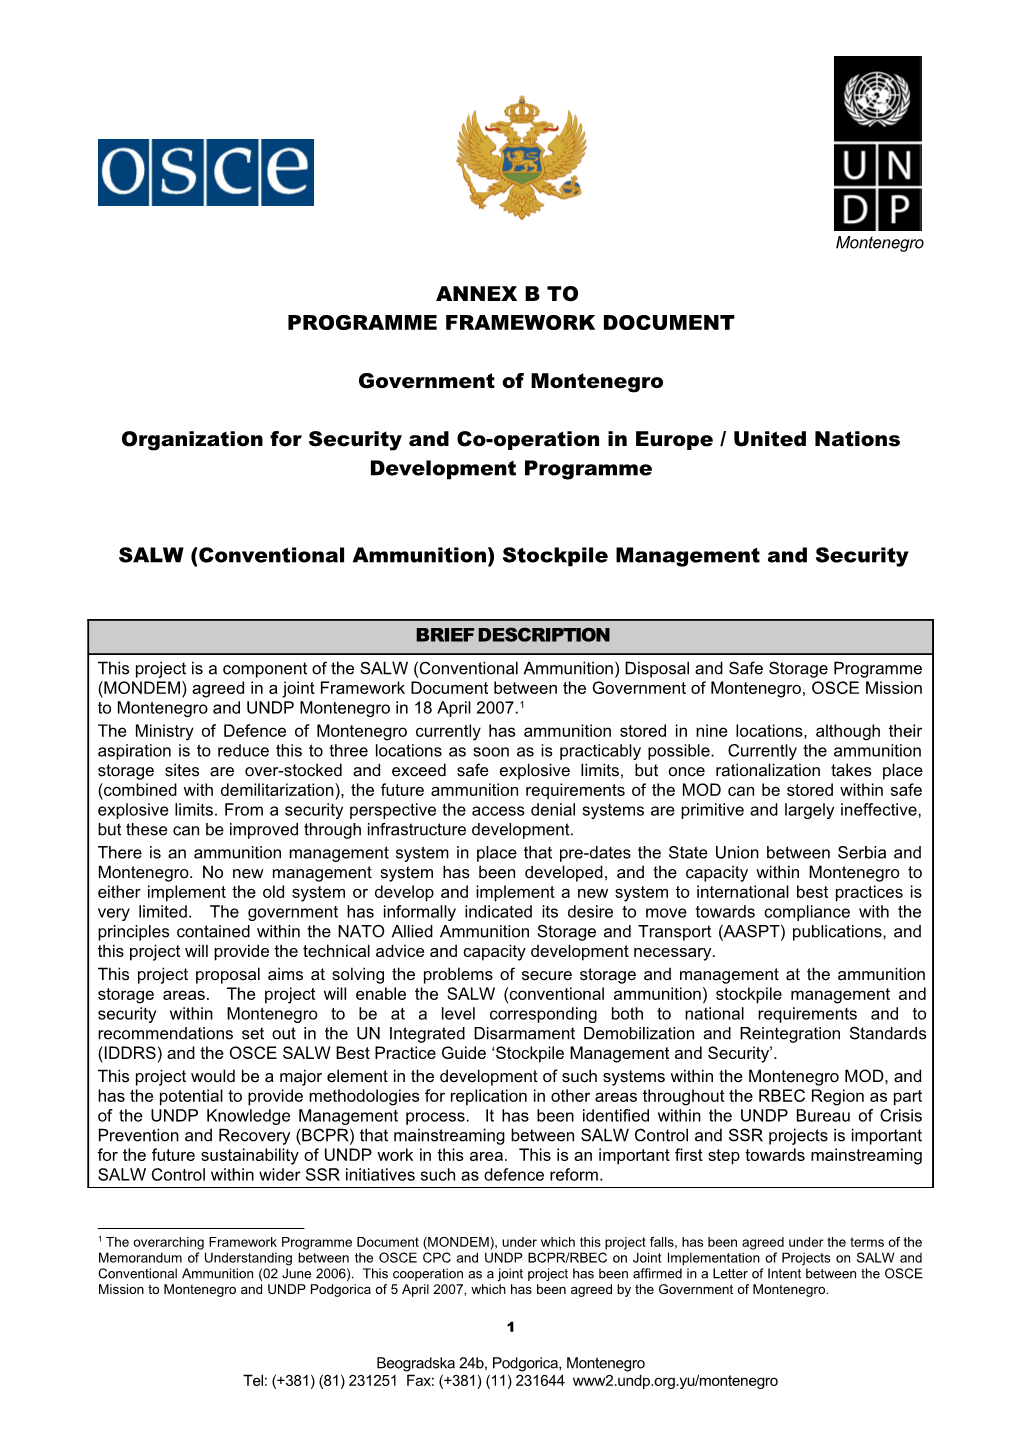 Organization for Security and Co-Operation in Europe / United Nations Development Programme